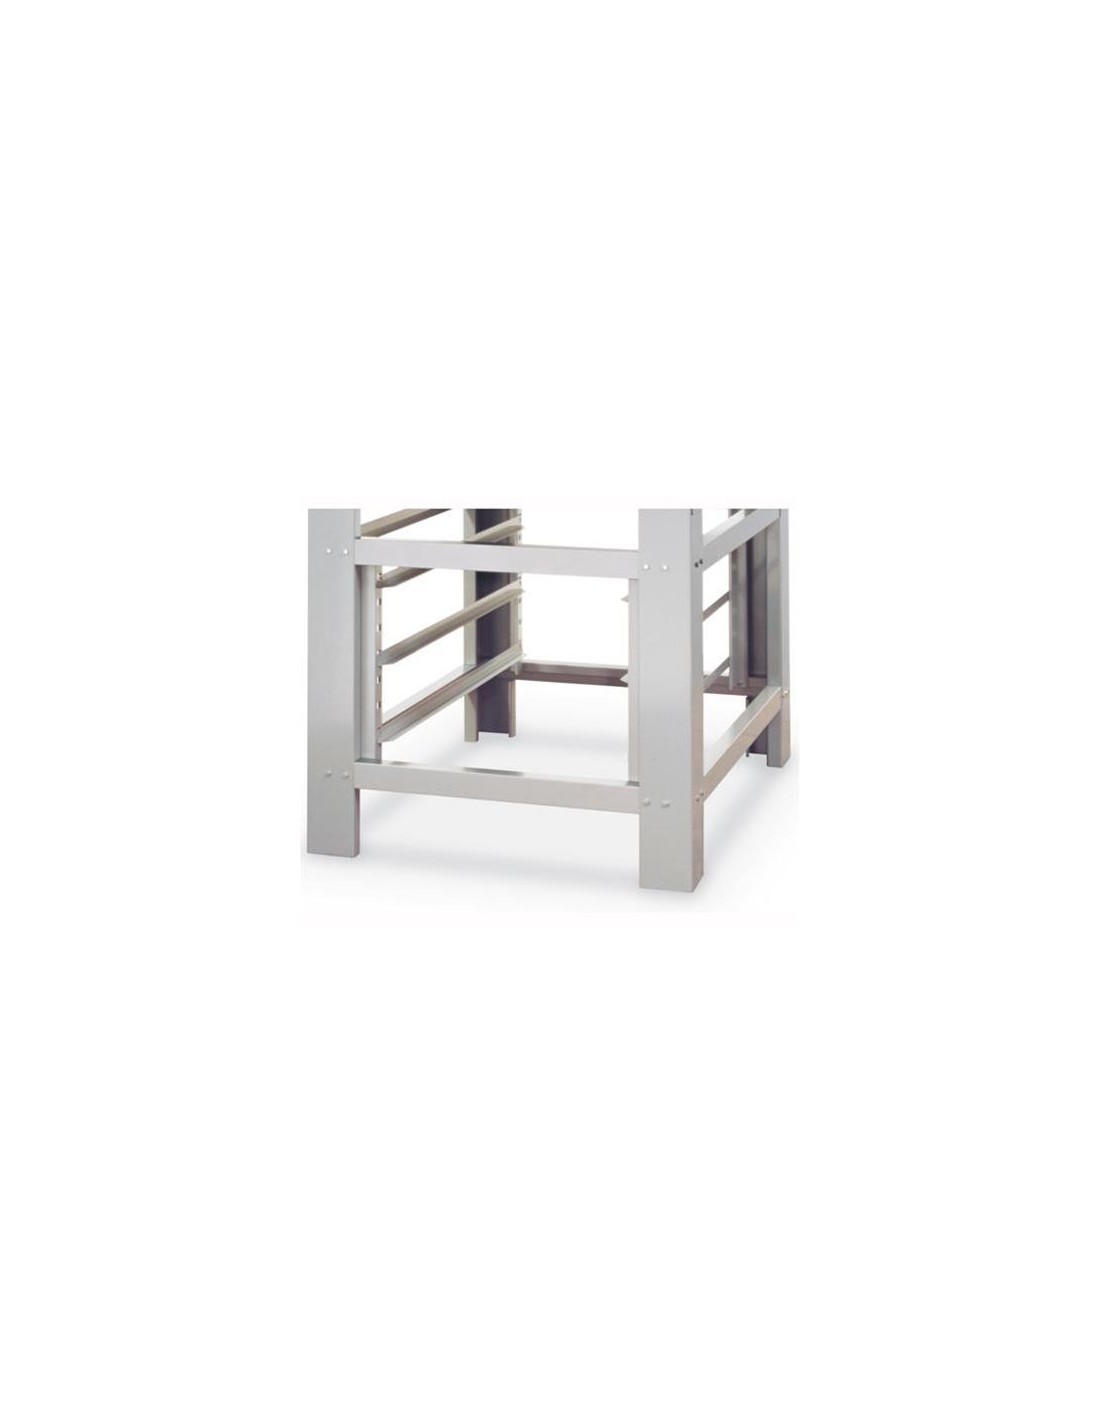 Oven support Model FAST 50 - Height 100 cm